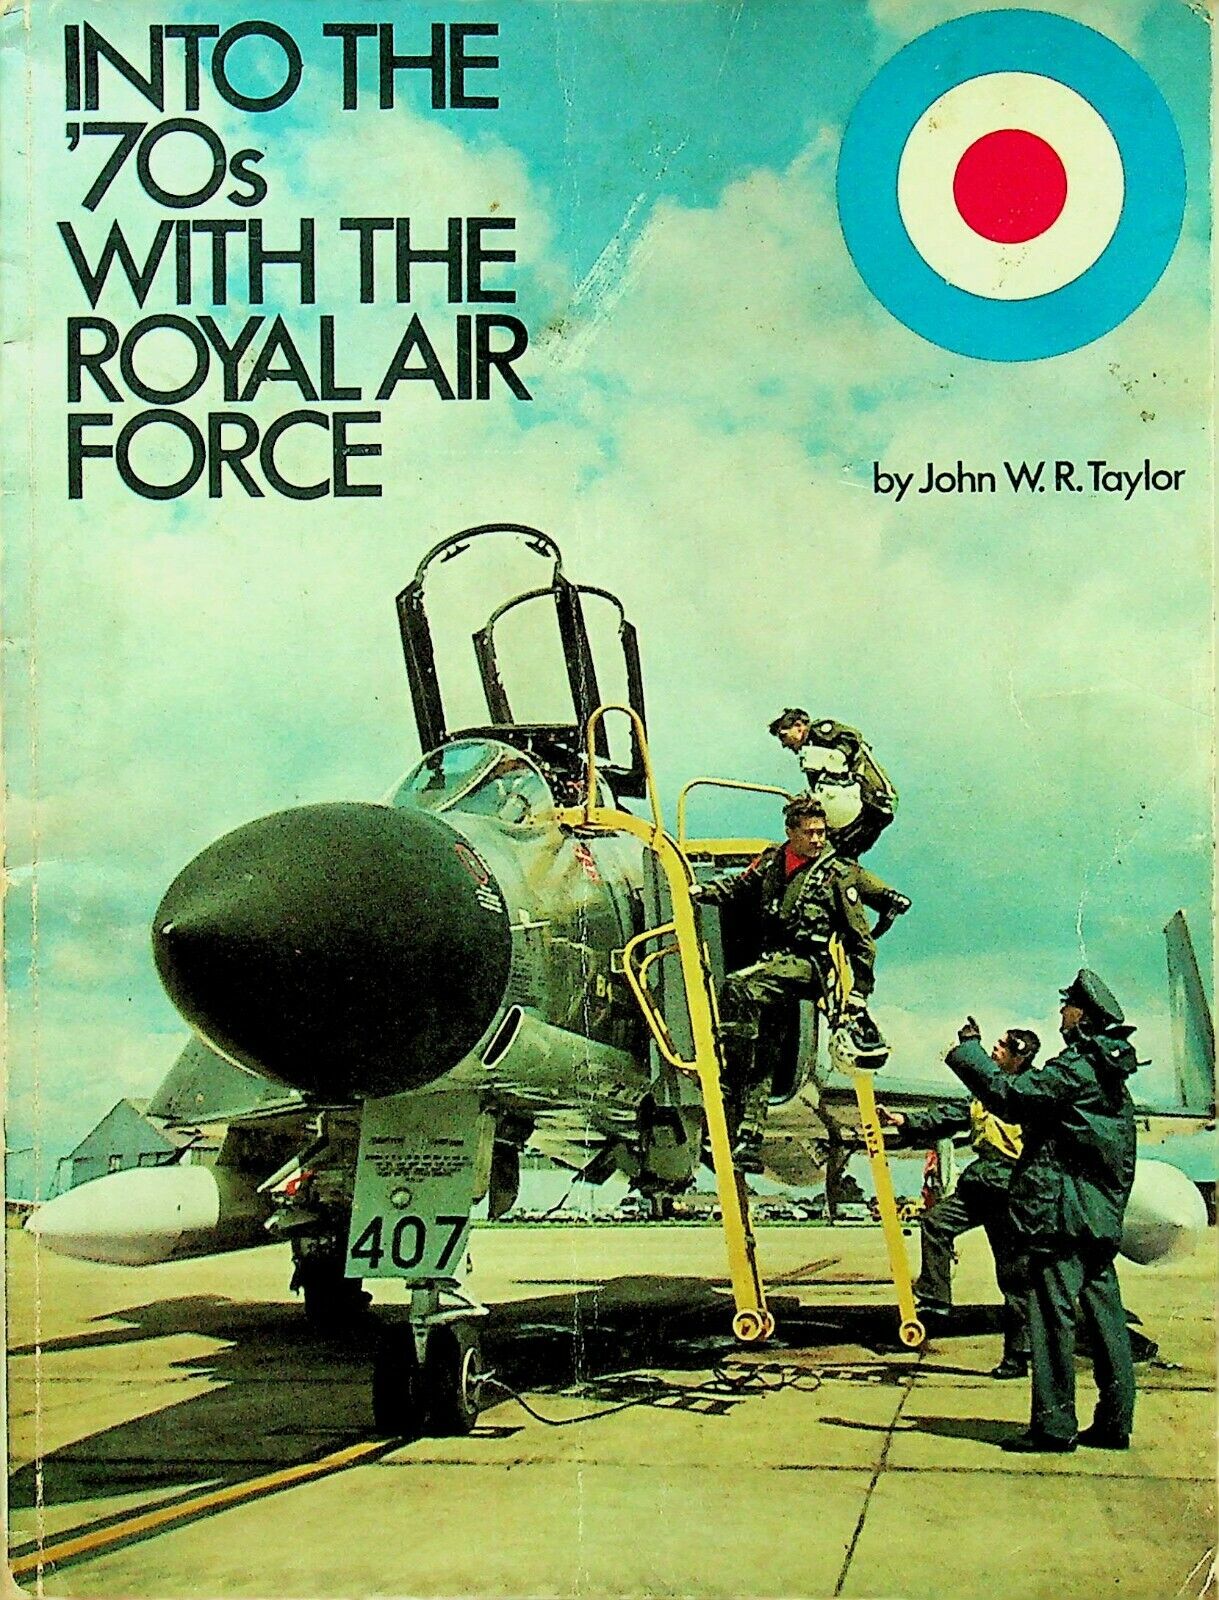 INTO THE 70s WITH THE ROYAL AIR FORCE by JWR TAYLOR